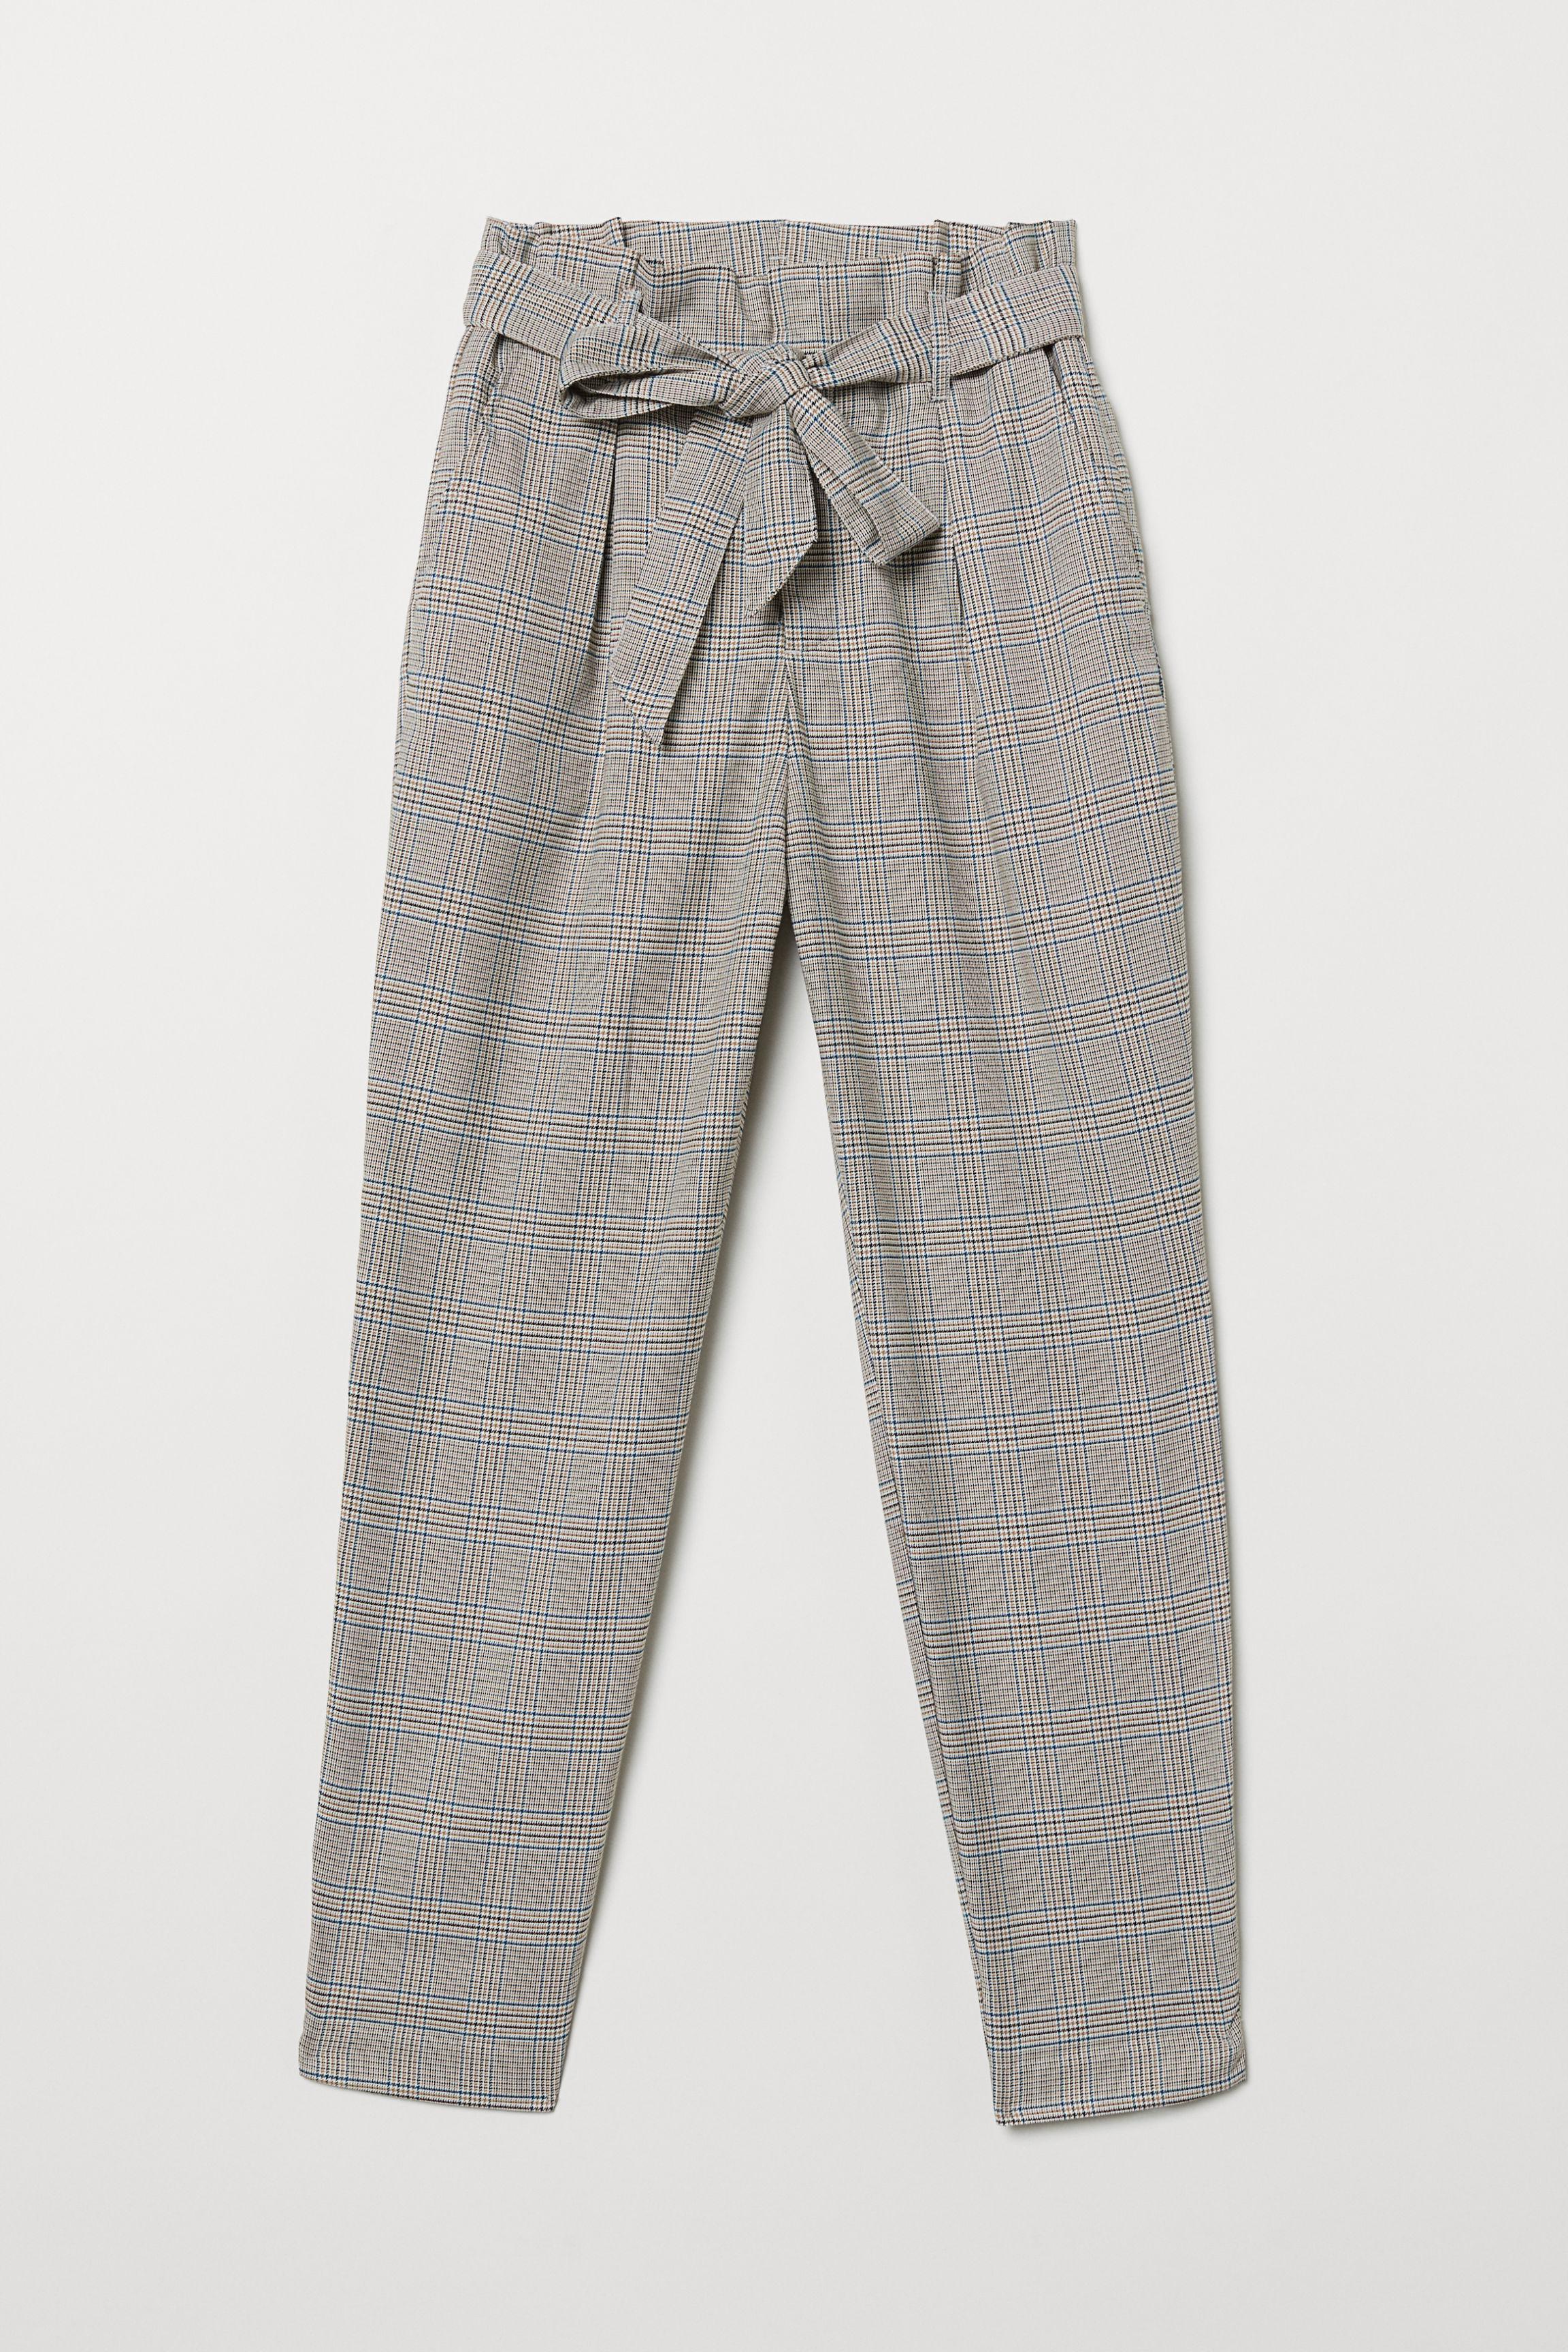 H&M Cotton Paper-bag Pants in Light Beige/Checked (Grey) - Lyst